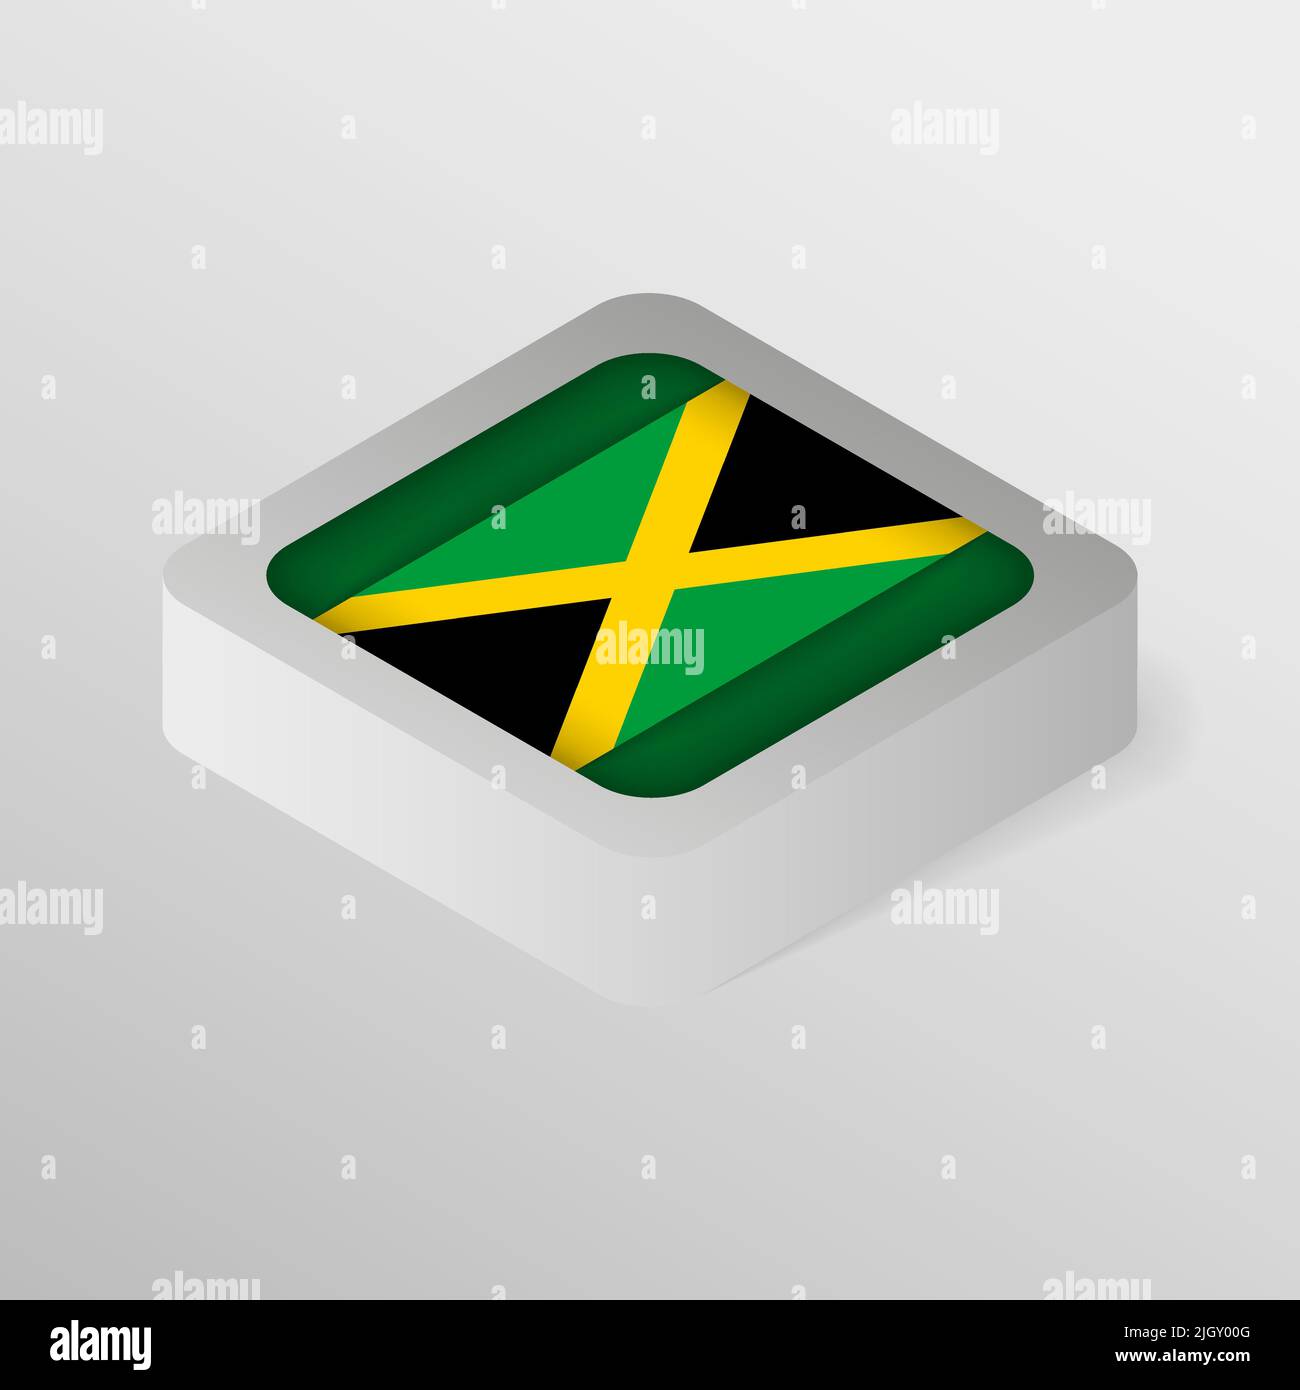 EPS10 Vector Patriotic shield with flag of Jamaica. An element of impact for the use you want to make of it. Stock Vector